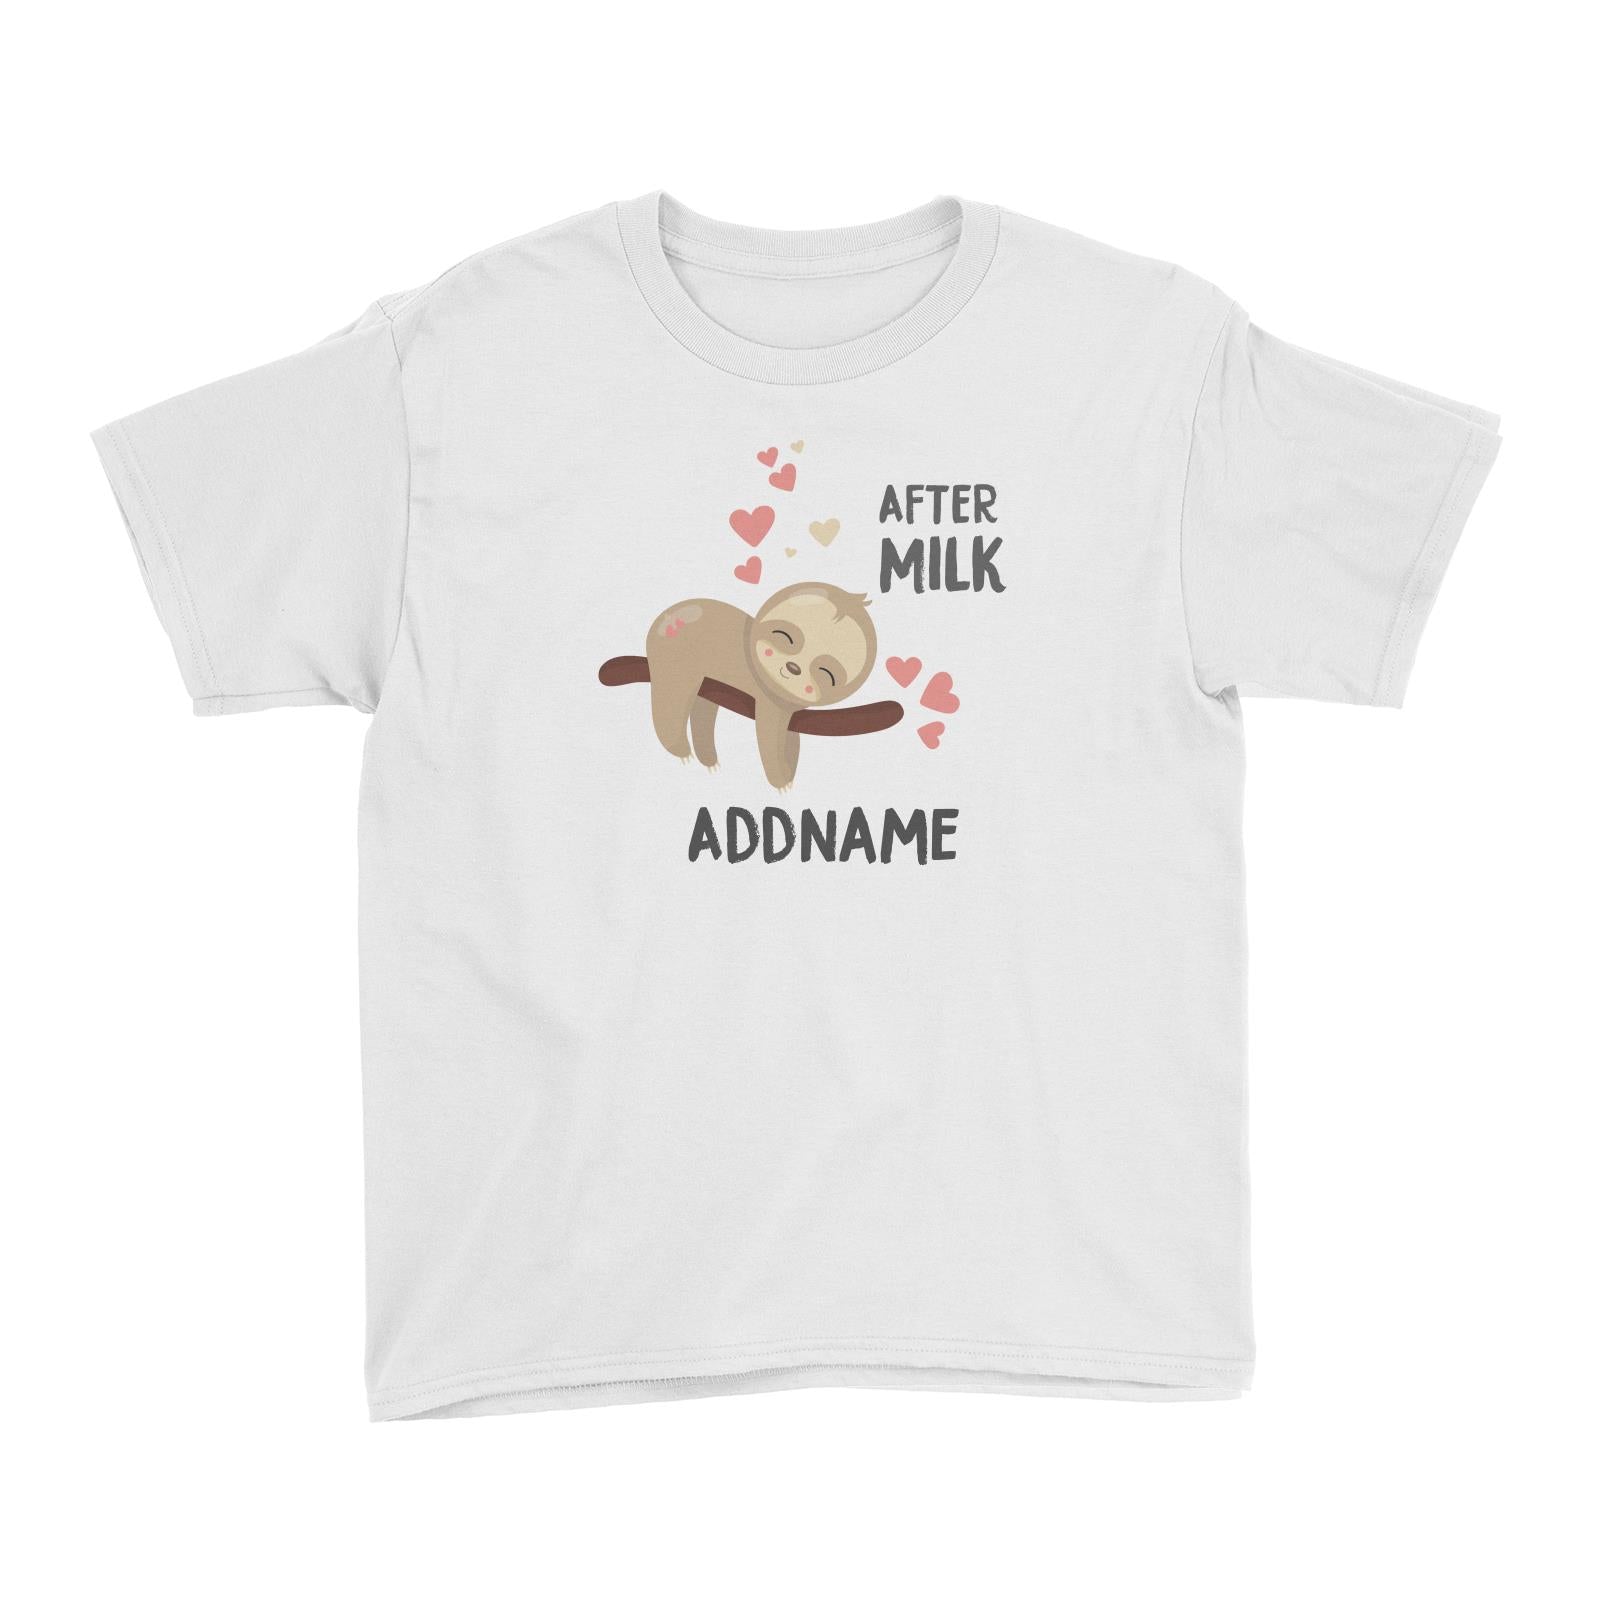 Cute Sloth After Milk Addname Kid's T-Shirt